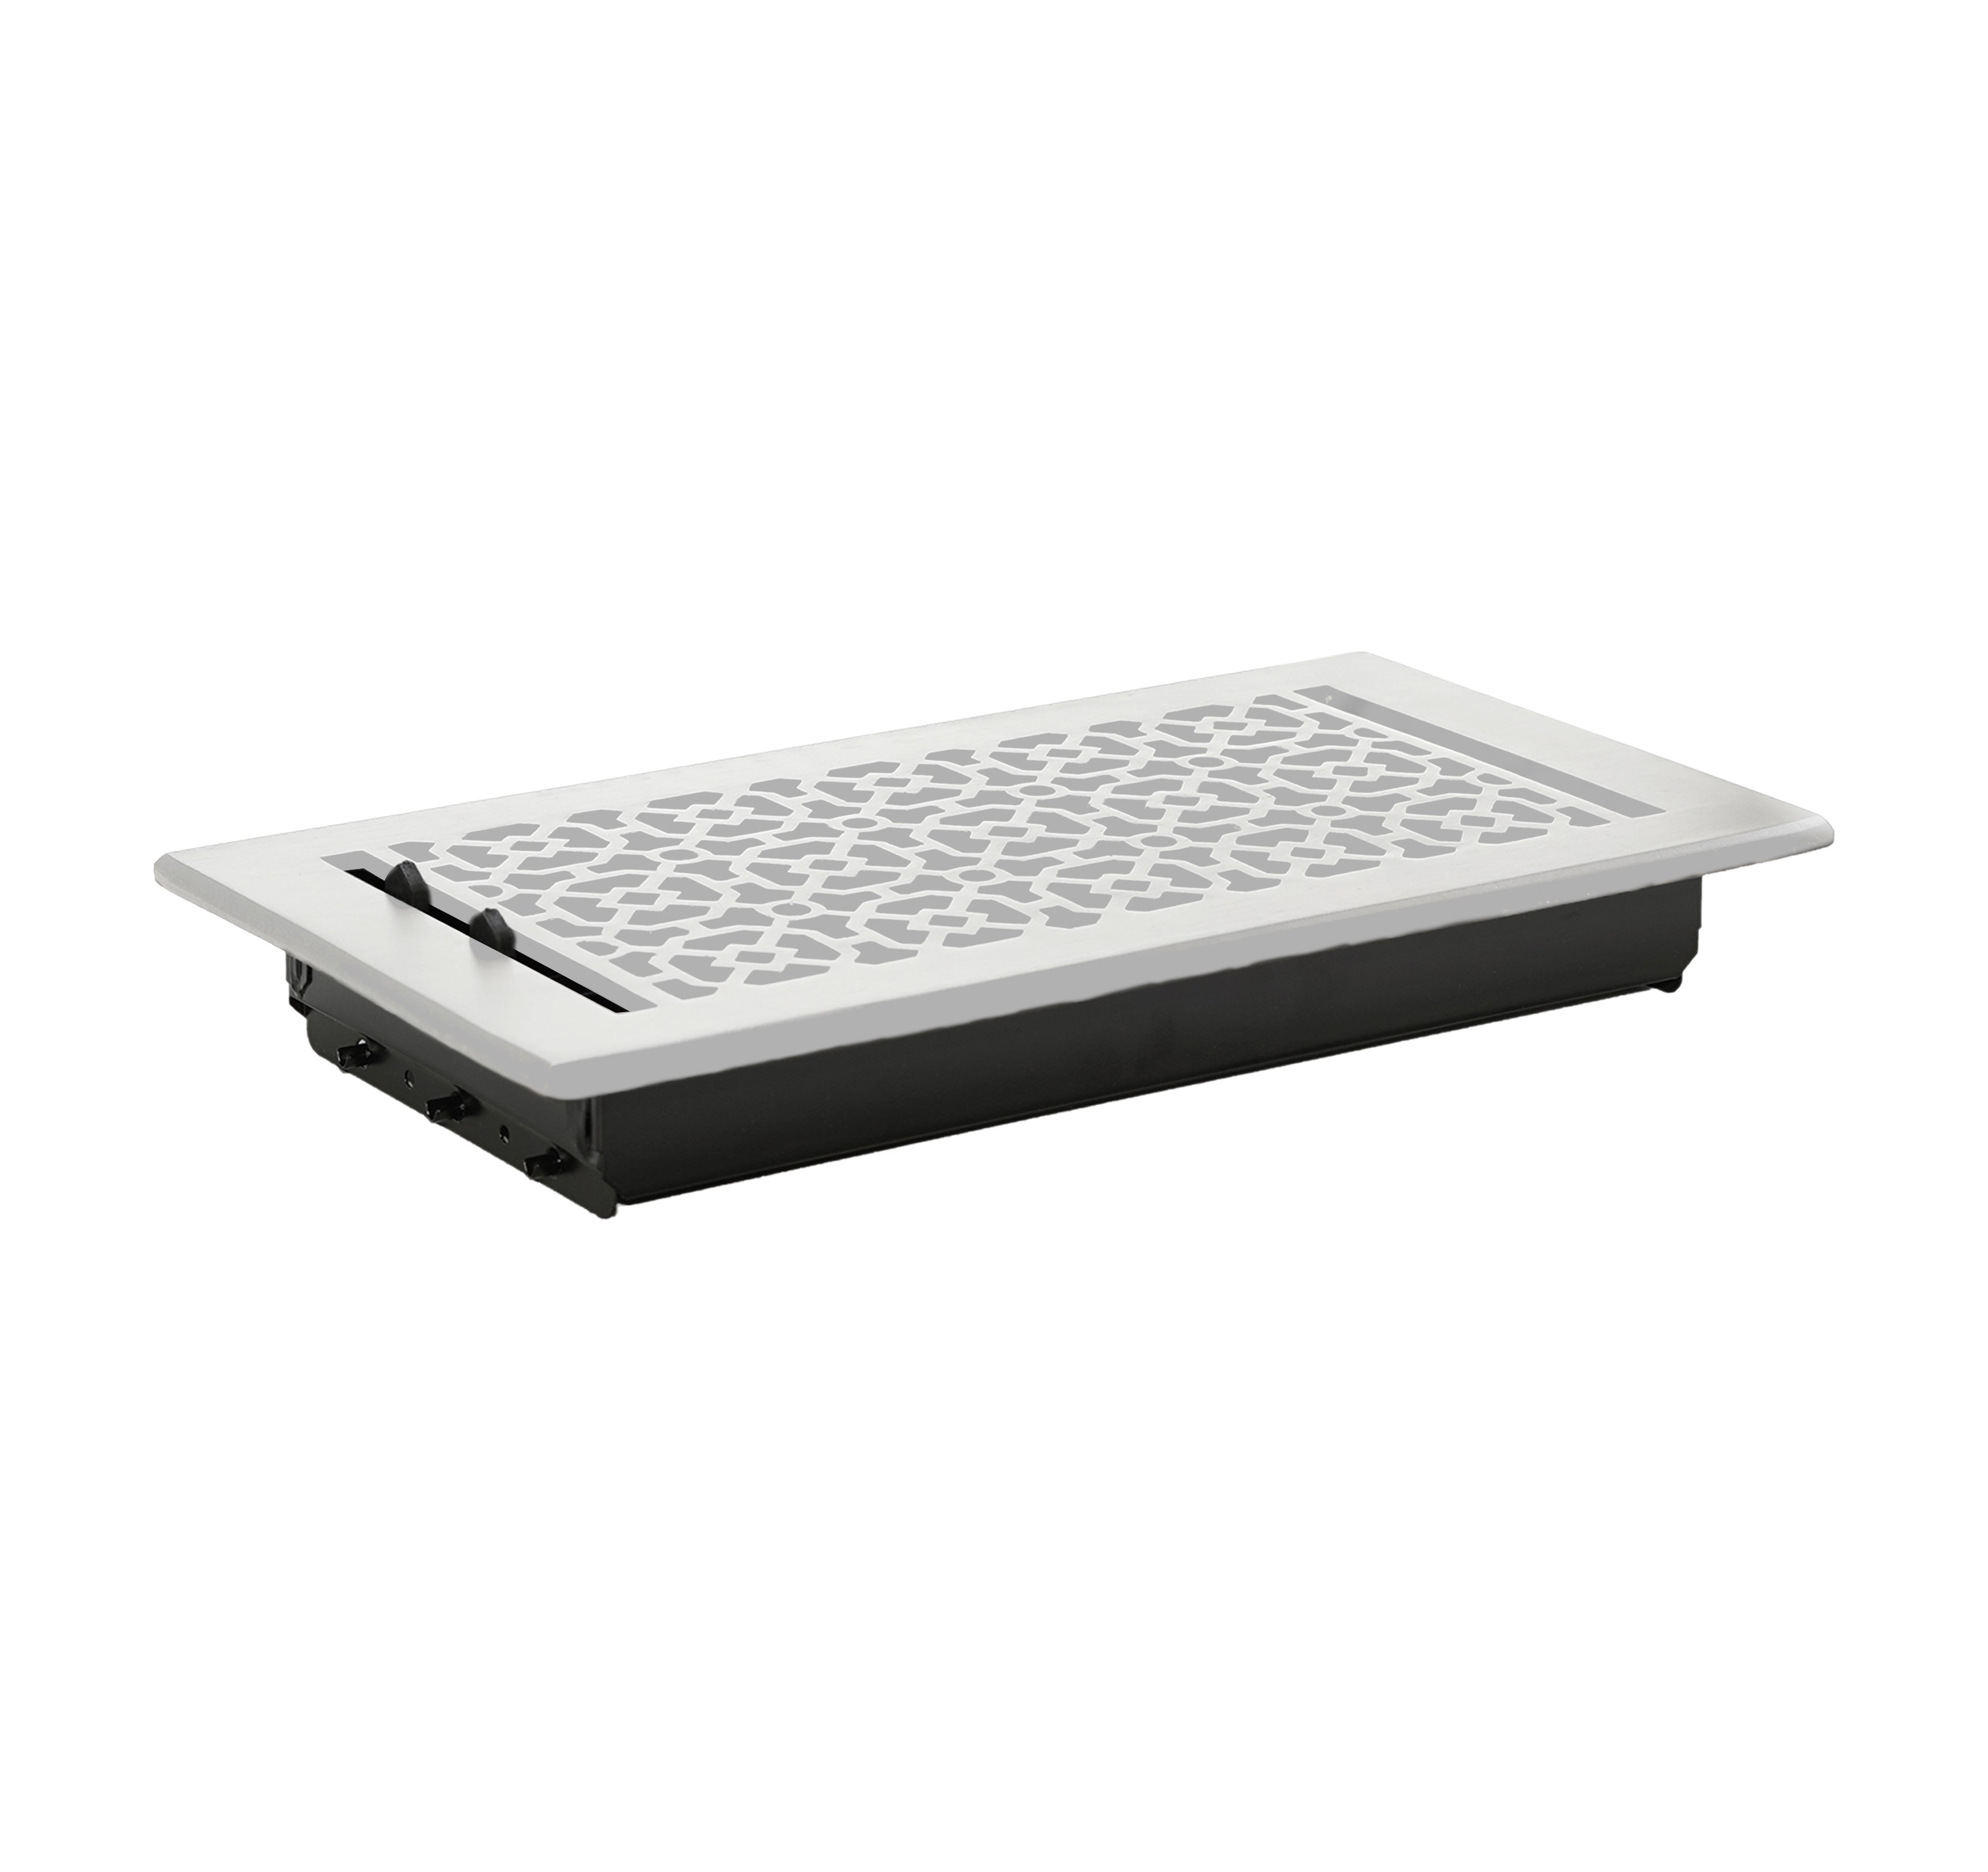 Achtek Air Supply Vent 9"x 9" Duct Opening (Overall 10-1/2"x 10-1/2"") Solid Cast Aluminium Register Cover | Powder Coated